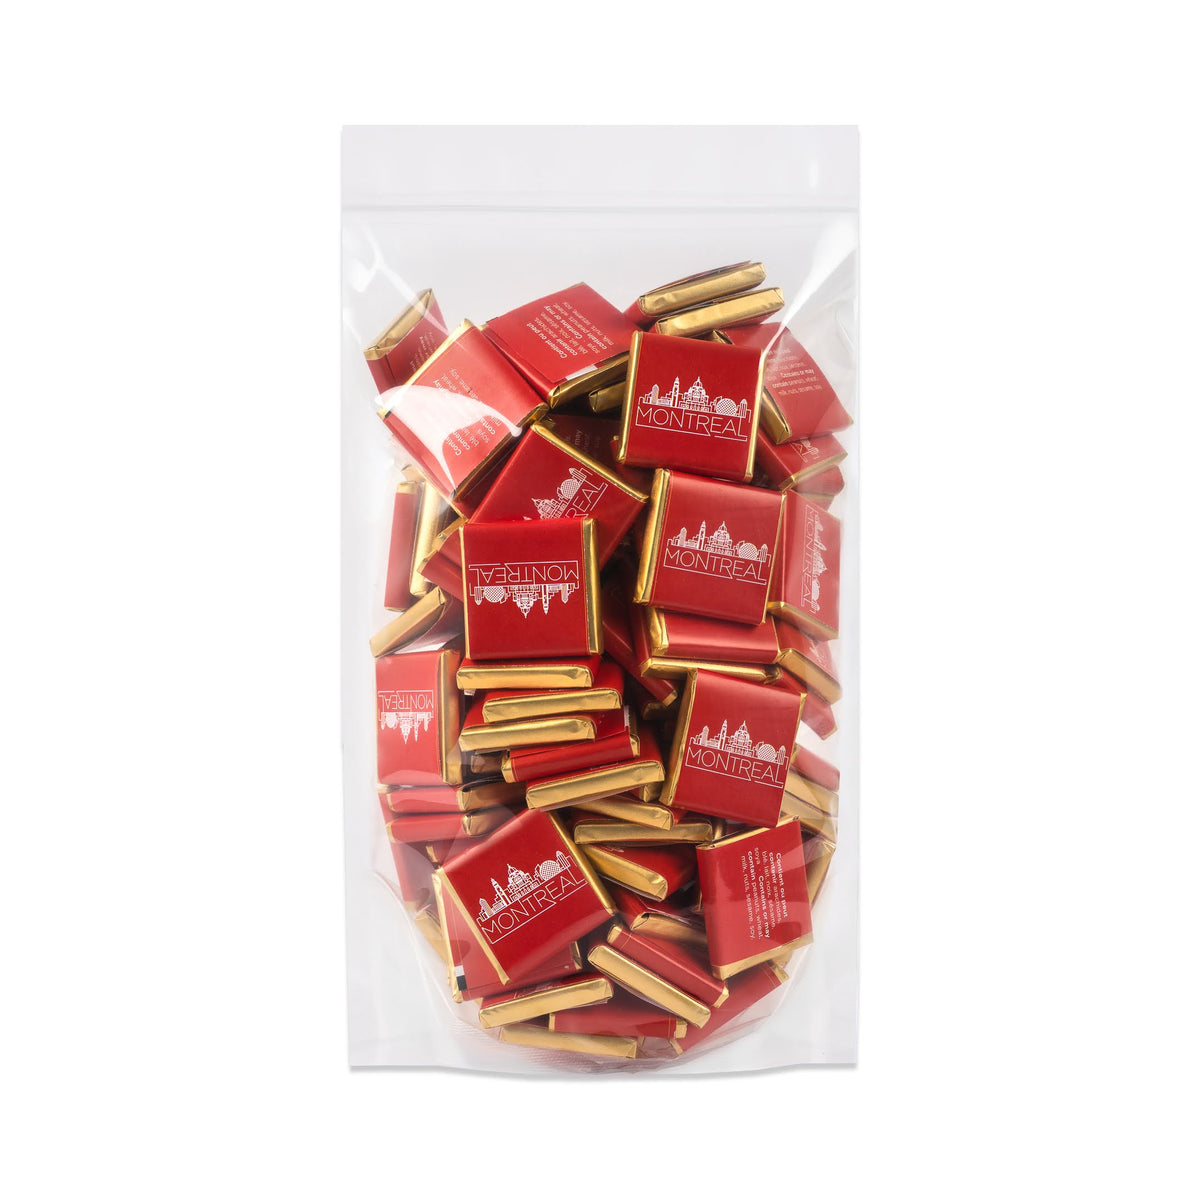 100 chocolate MTL squares - 0.50$ each